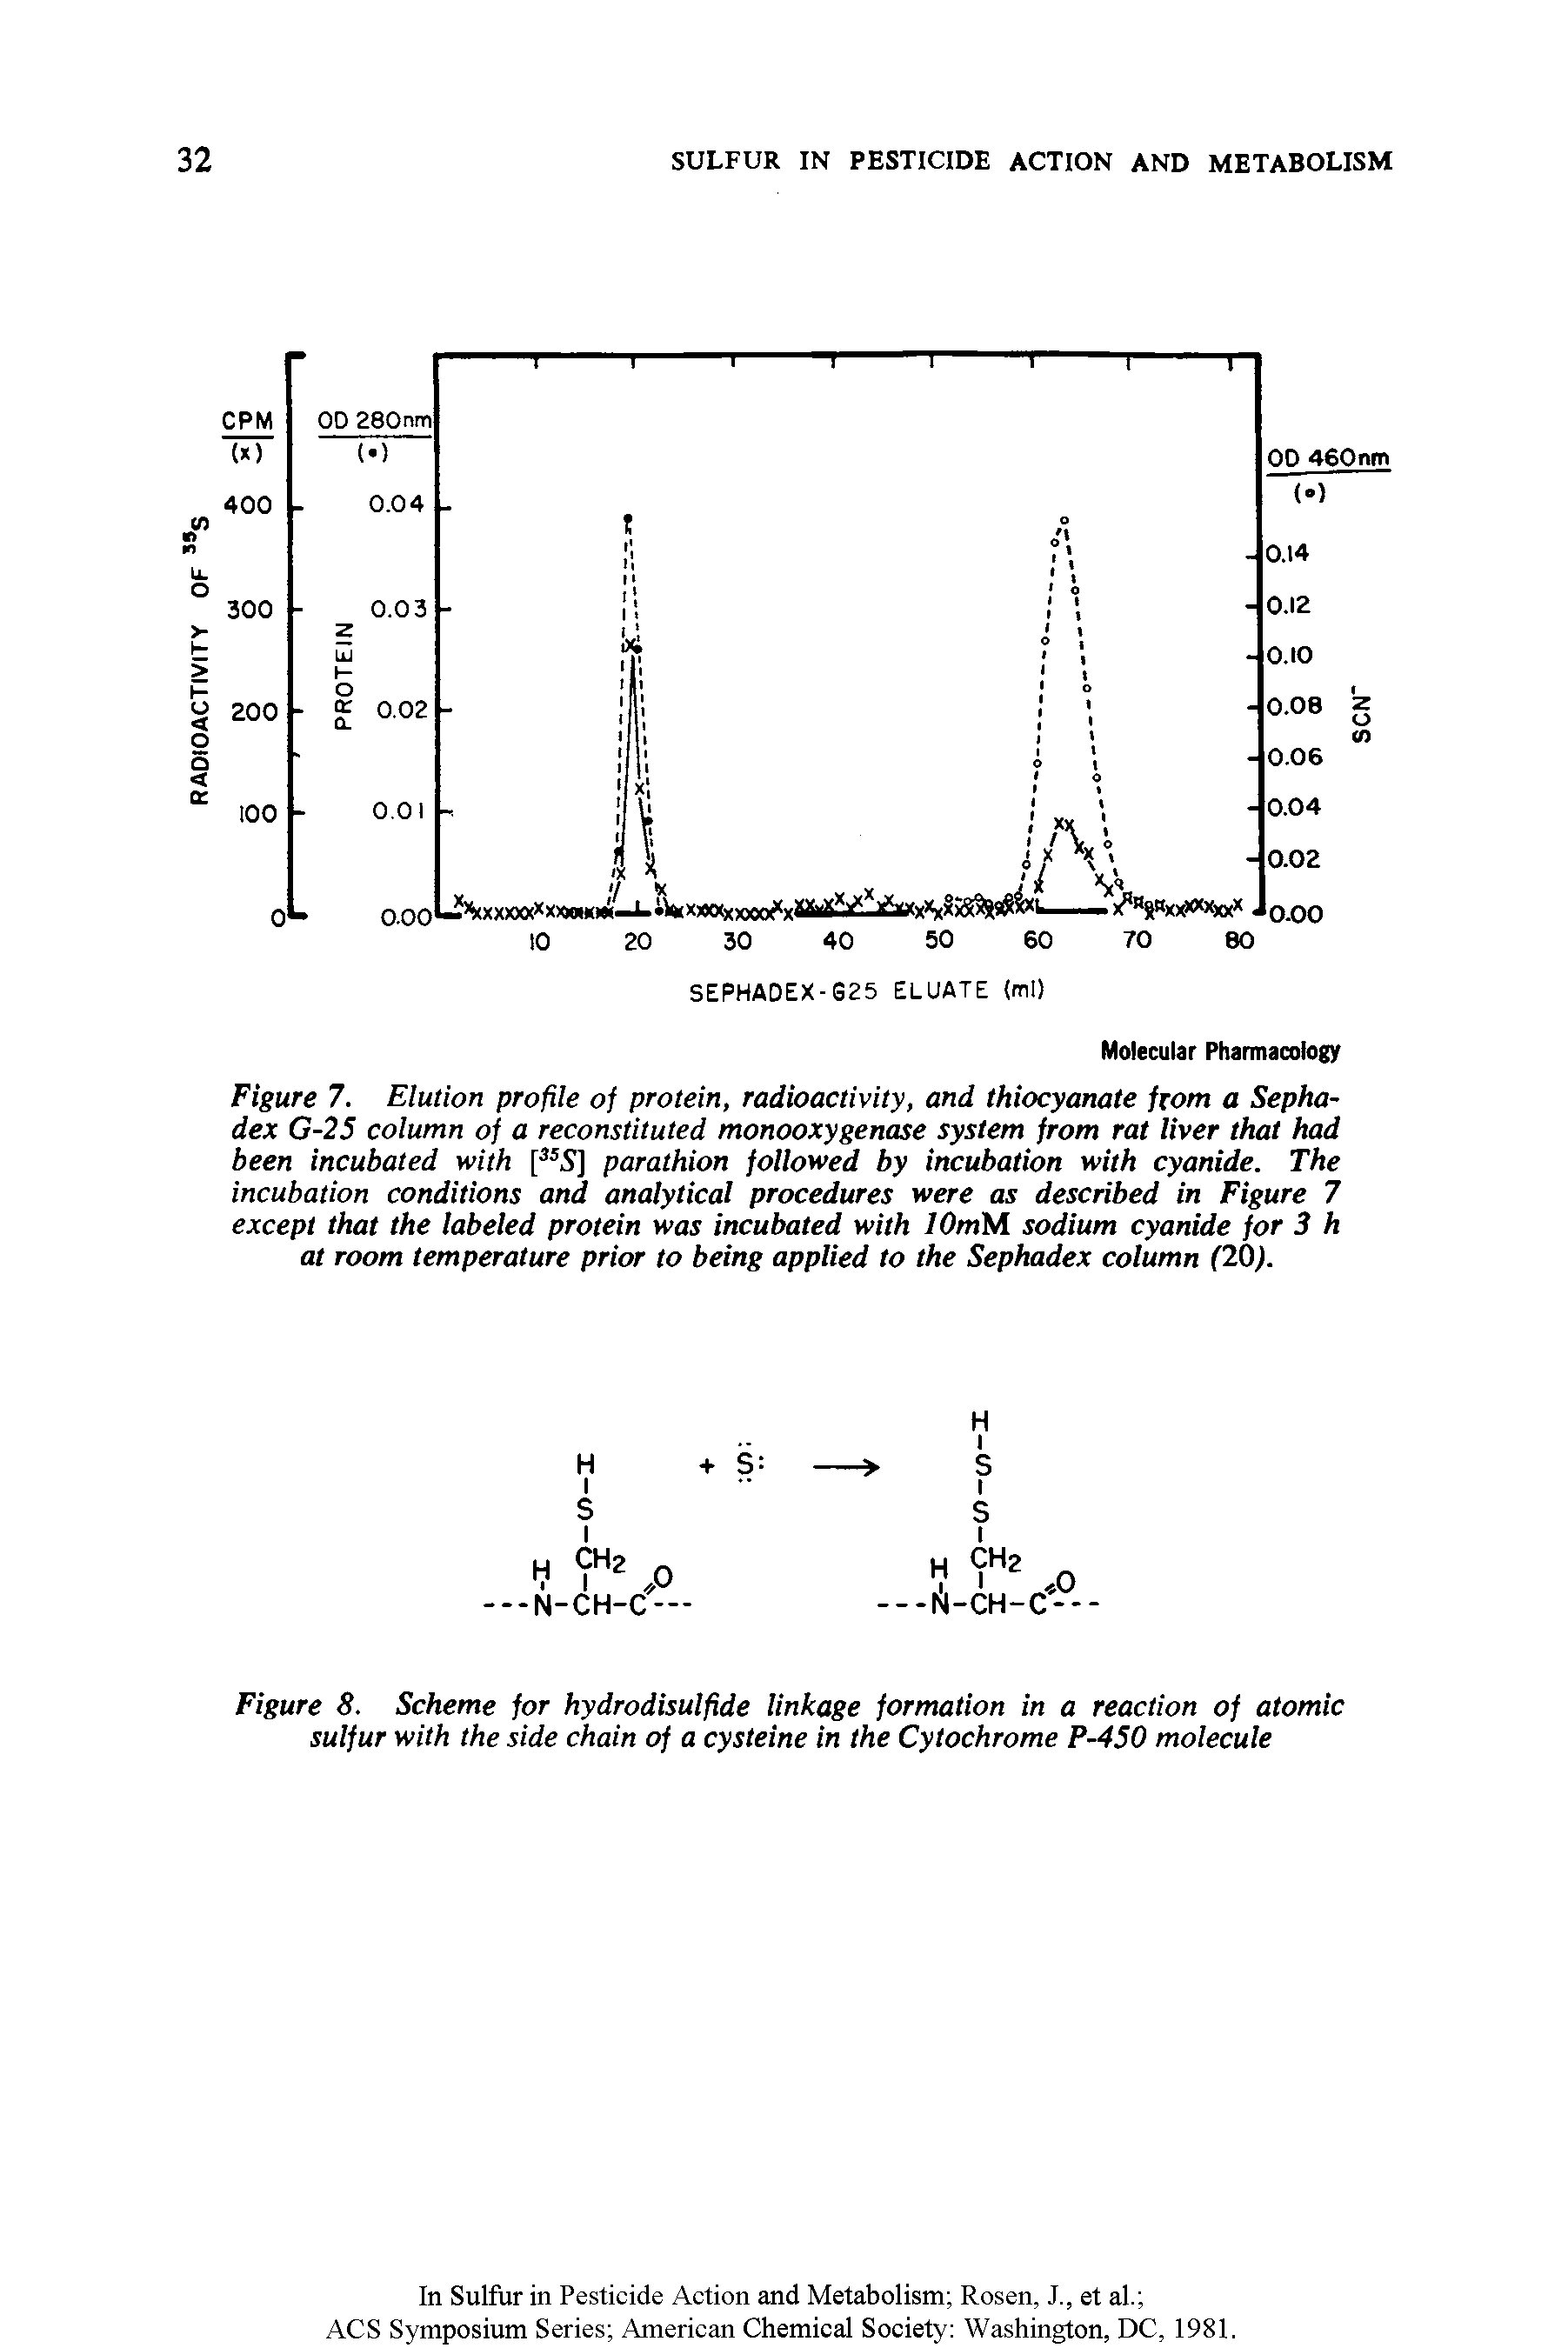 Figure 7. Elution profile of protein, radioactivity, and thiocyanate from a Sepha-dex G-25 column of a reconstituted monooxygenase system from rat liver that had been incubated with [ 5] parathion followed by incubation with cyanide. The incubation conditions and analytical procedures were as described in Figure 7 except that the labeled protein was incubated with lOmM sodium cyanide for 3 h at room temperature prior to being applied to the Sephadex column (20).